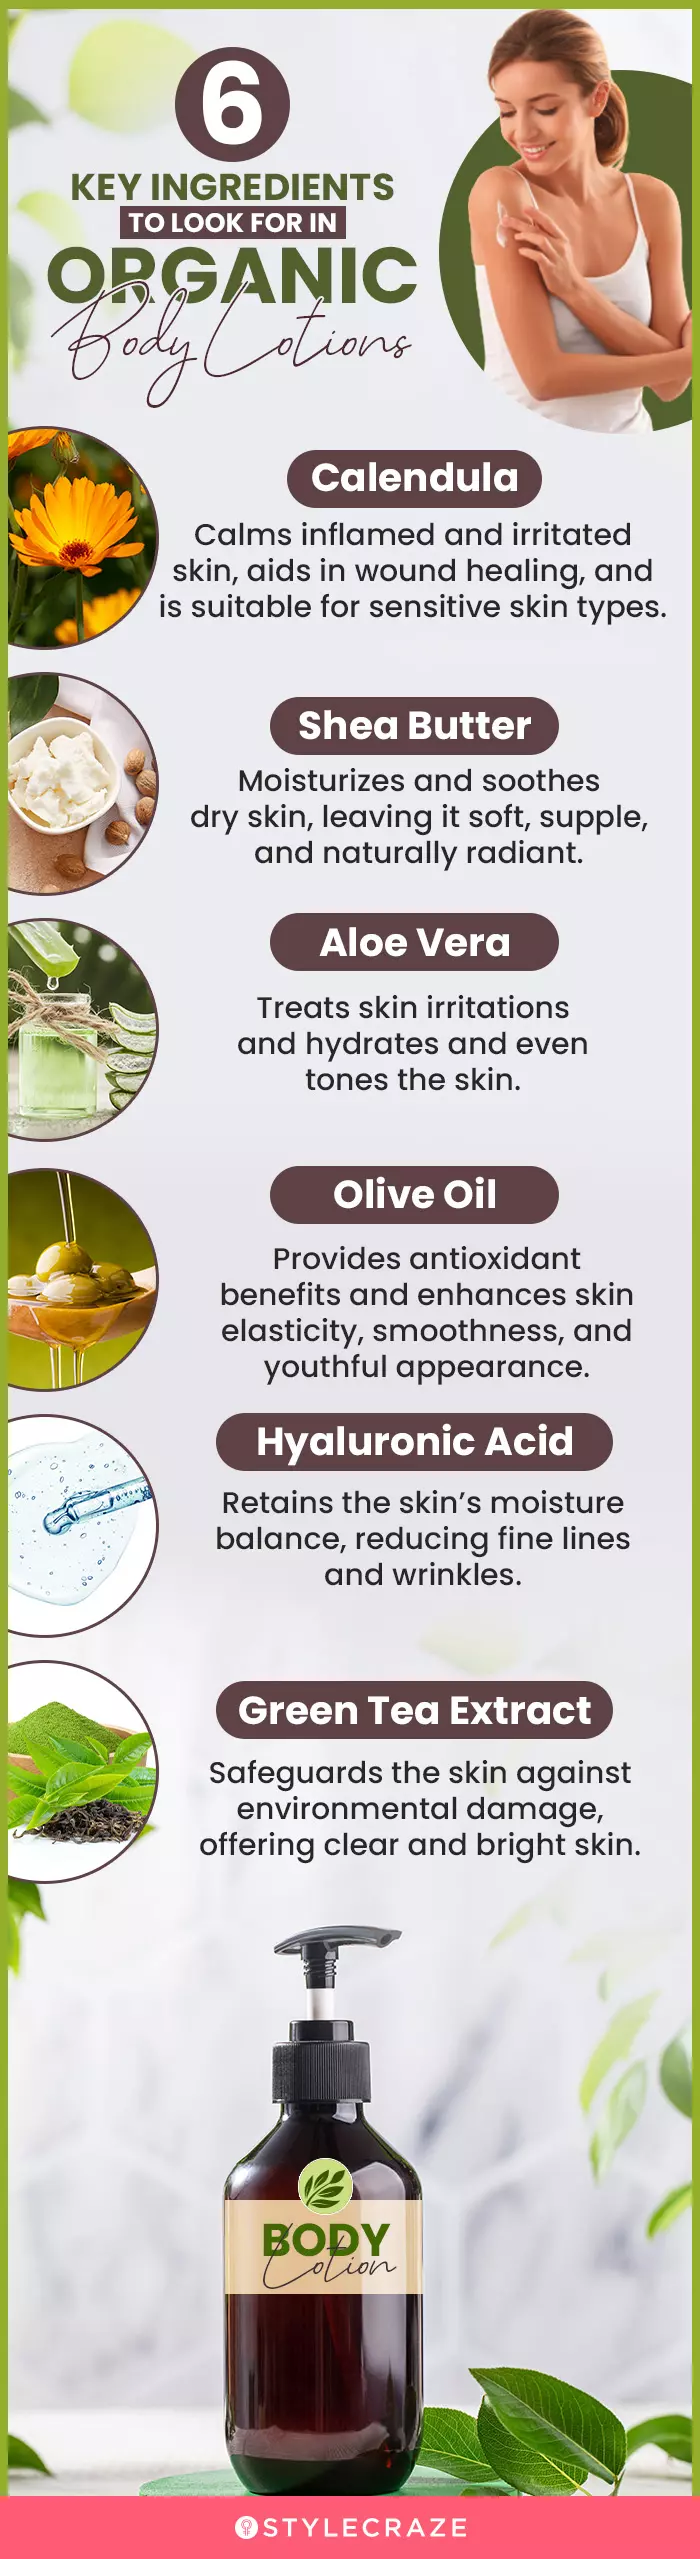 6 Top Ingredients To Look For In Organic Body Lotions (infographic)